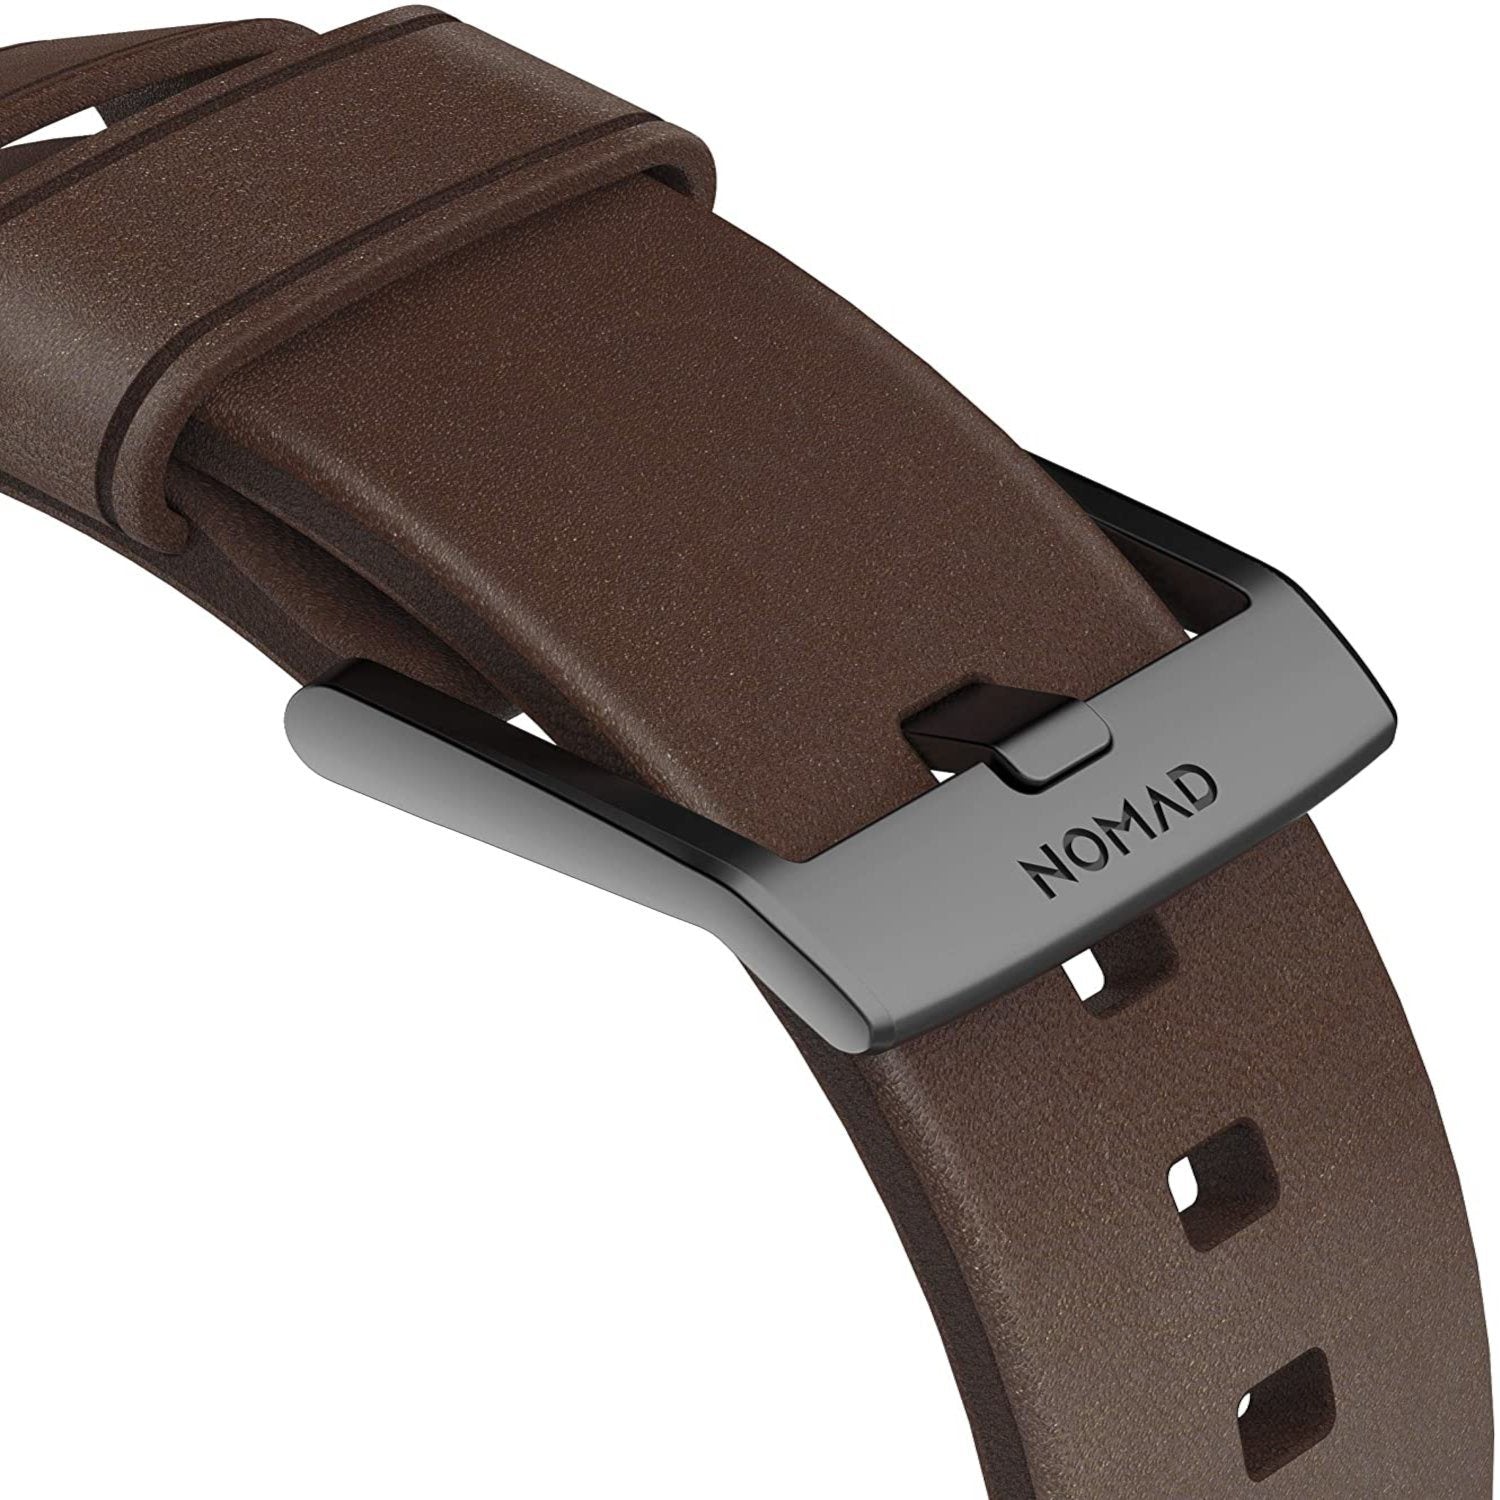 NOMAD Modern Strap Rustic Brown Horween Leather for Apple Watch 40mm/38mm, Black Hardware Apple Watch Strap NOMAD 